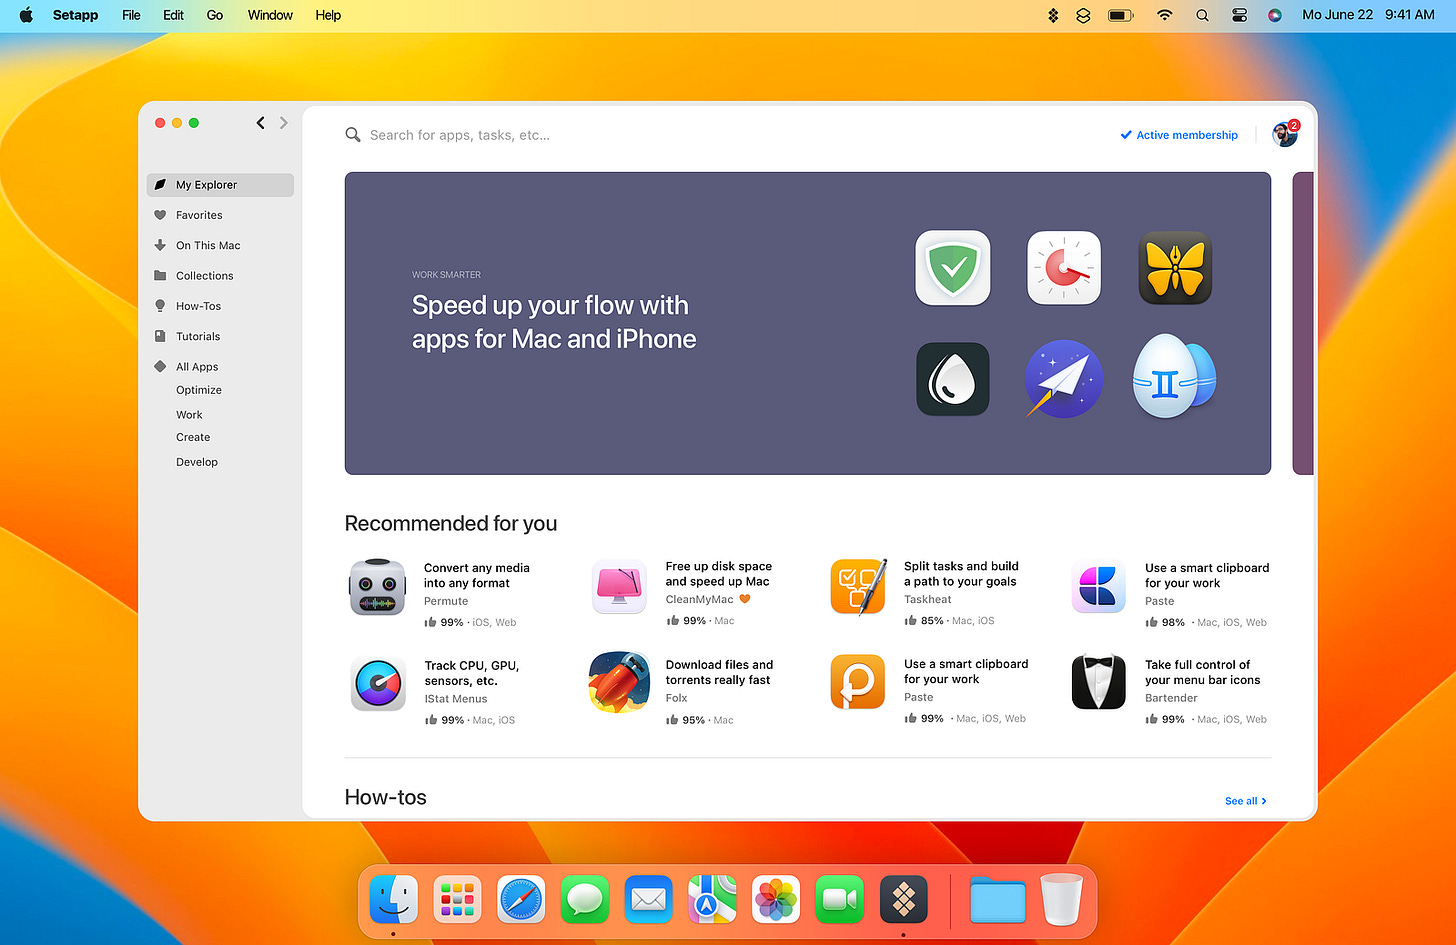 Screenshot of a Mac desktop, showing the Setapp dashboard. Text reads “Speed up your flow with apps for Mac and iPhone”. There are some app icons, and a list of apps Recommended for you, including Permute, CleanMyMac, Taskheat, Craft, iStat Menus, Folx, Paste, Bartender